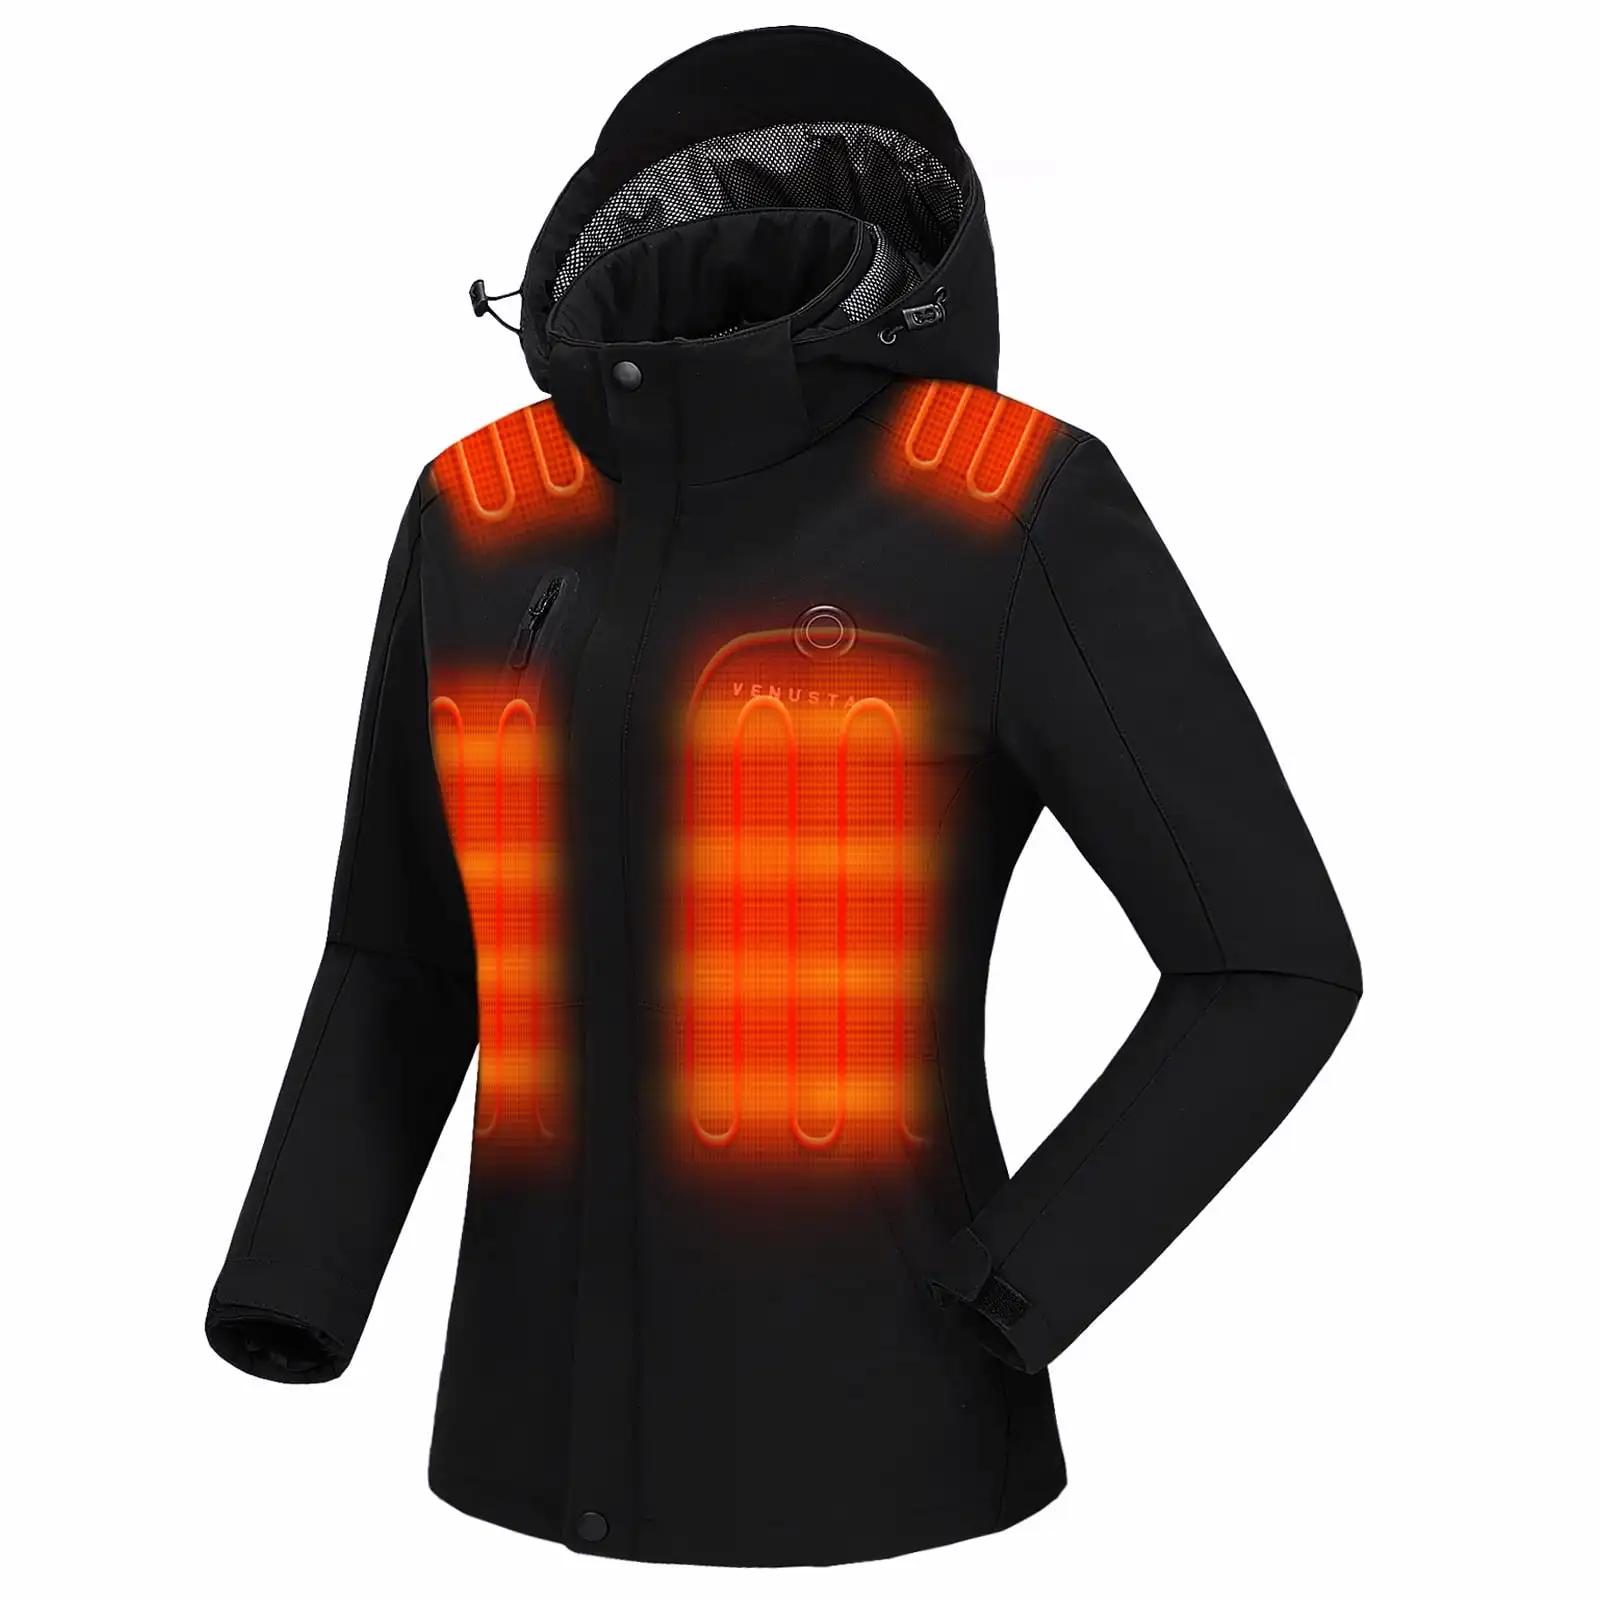 Women's Heated Jacket with Battery Pack 7.4V 3 Heating Levels Windproof Insulated with Detachable Hood Slim Fit (Black, L)